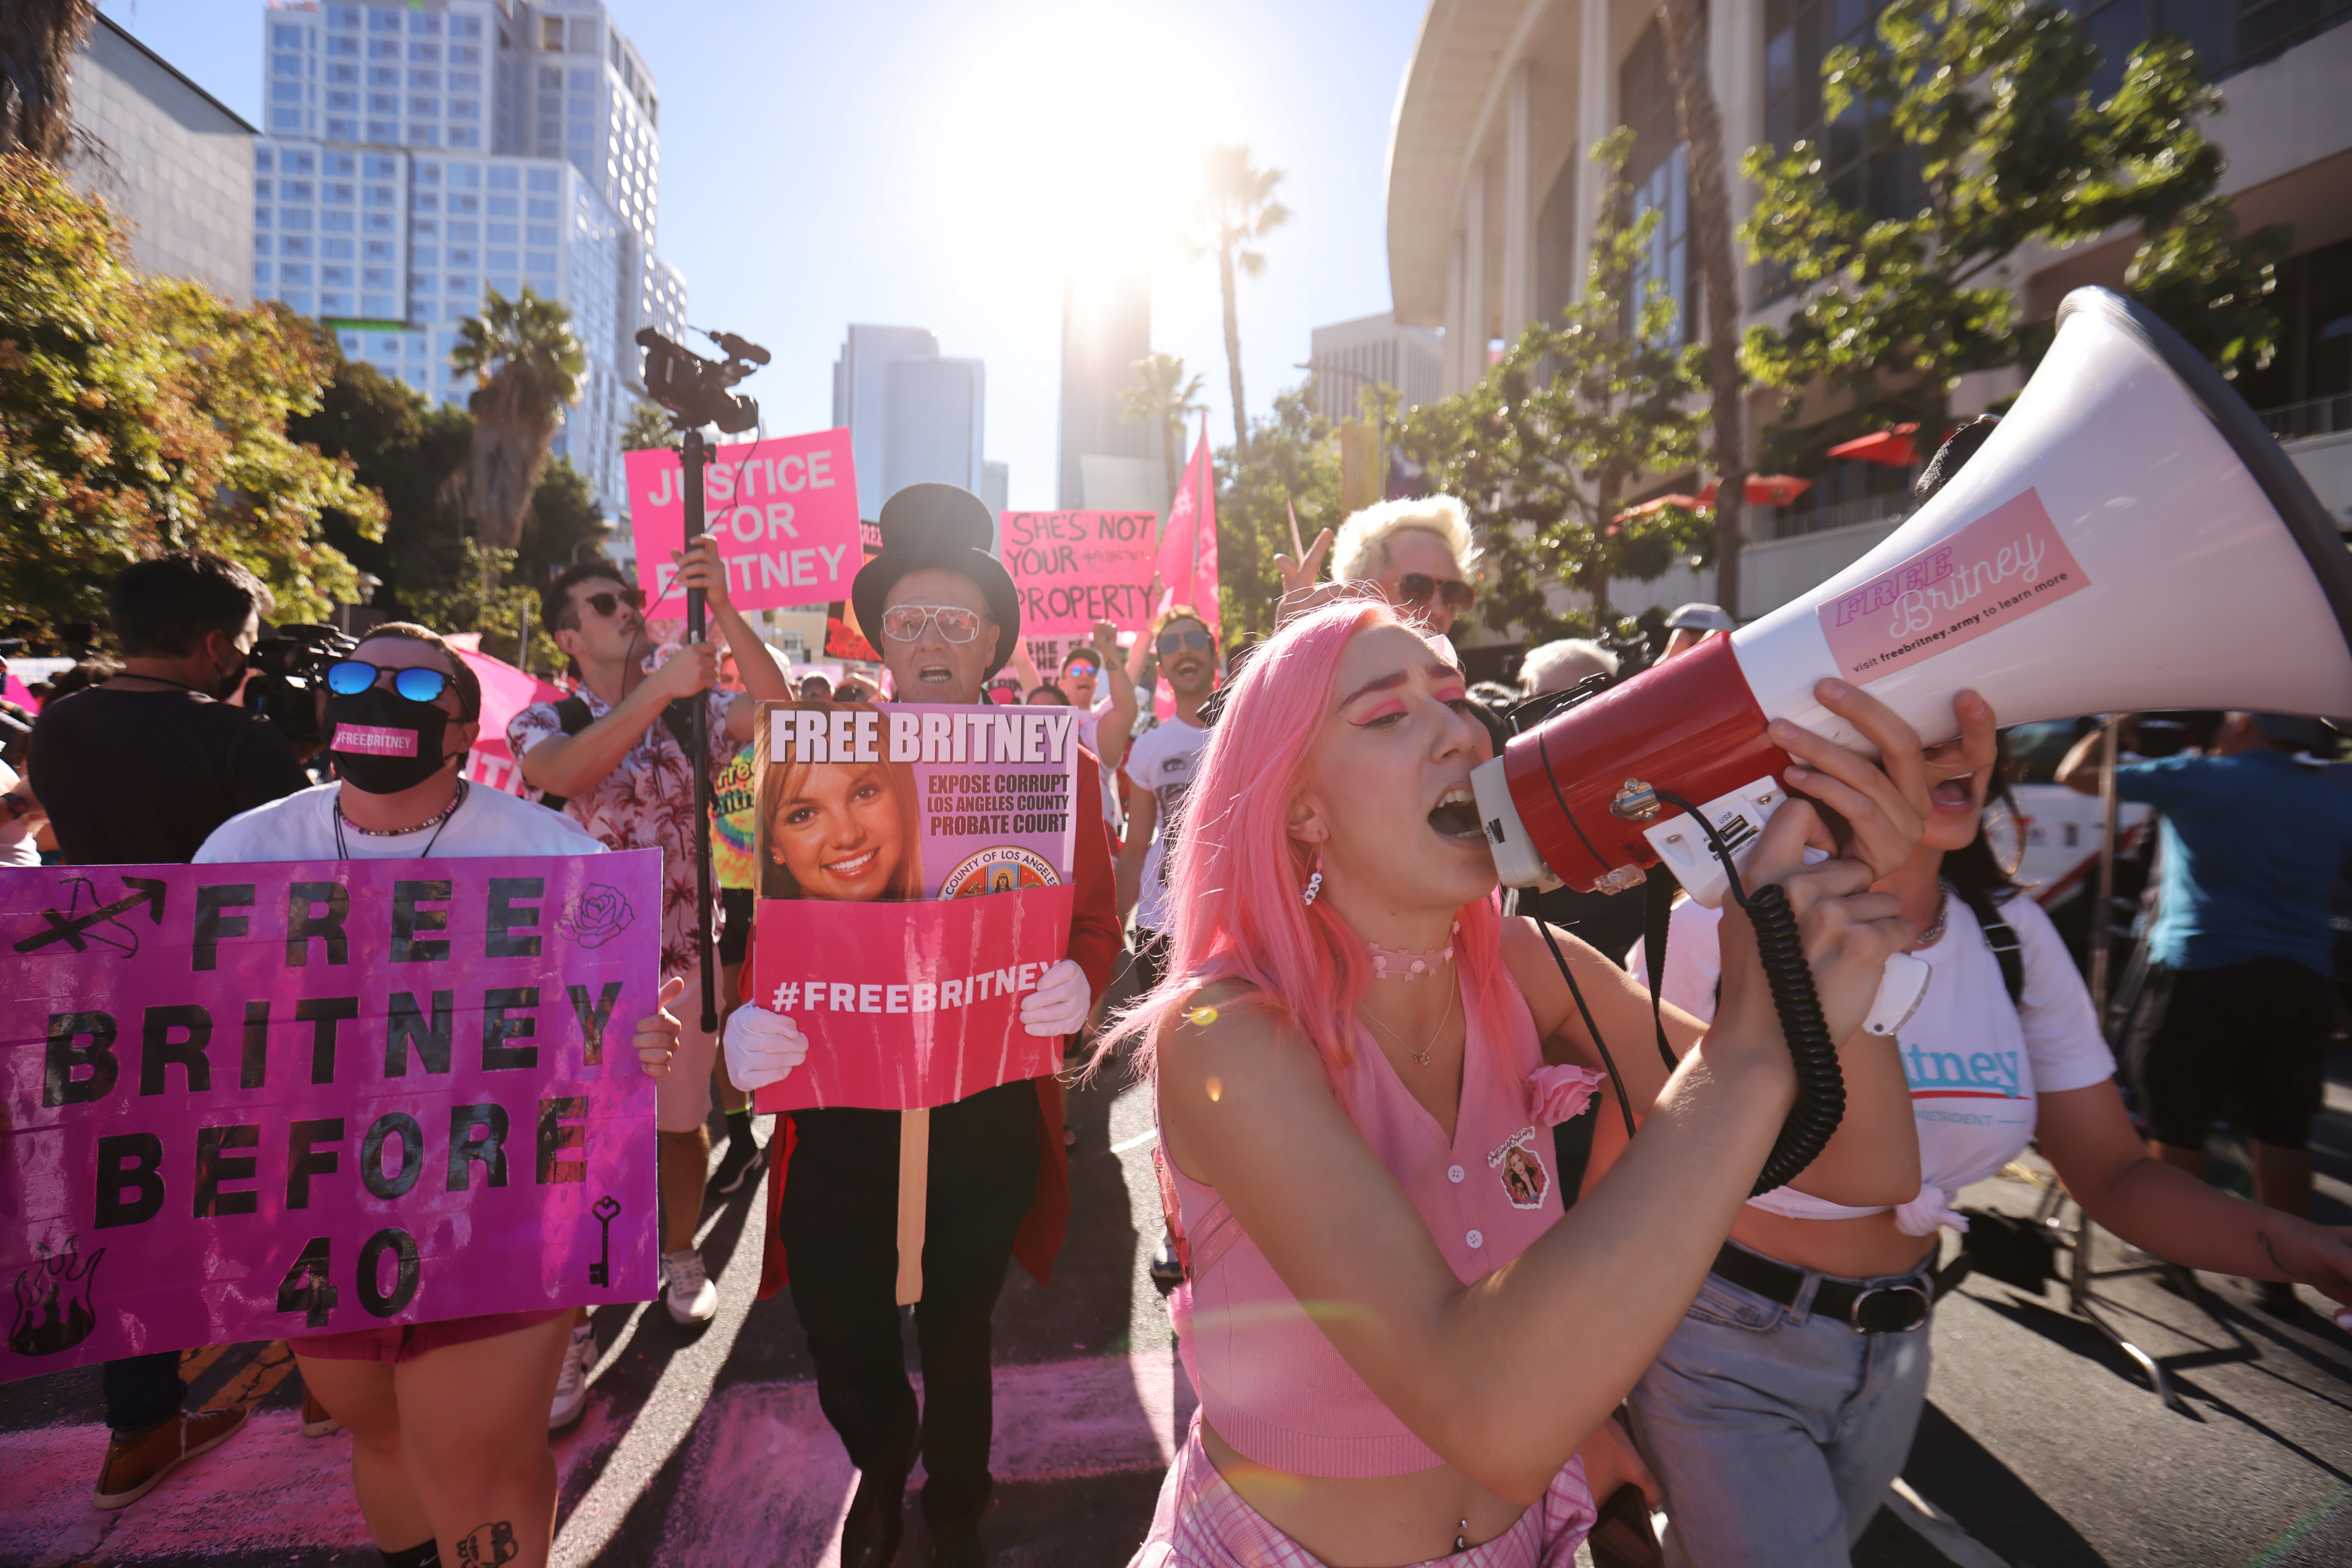 Supporters of singer Britney Spears gather outside the Stanley Mosk Courthouse on the day of her conservatorship case hearing, in Los Angeles, California, U.S. November 12, 2021. REUTERS/Mike Blake